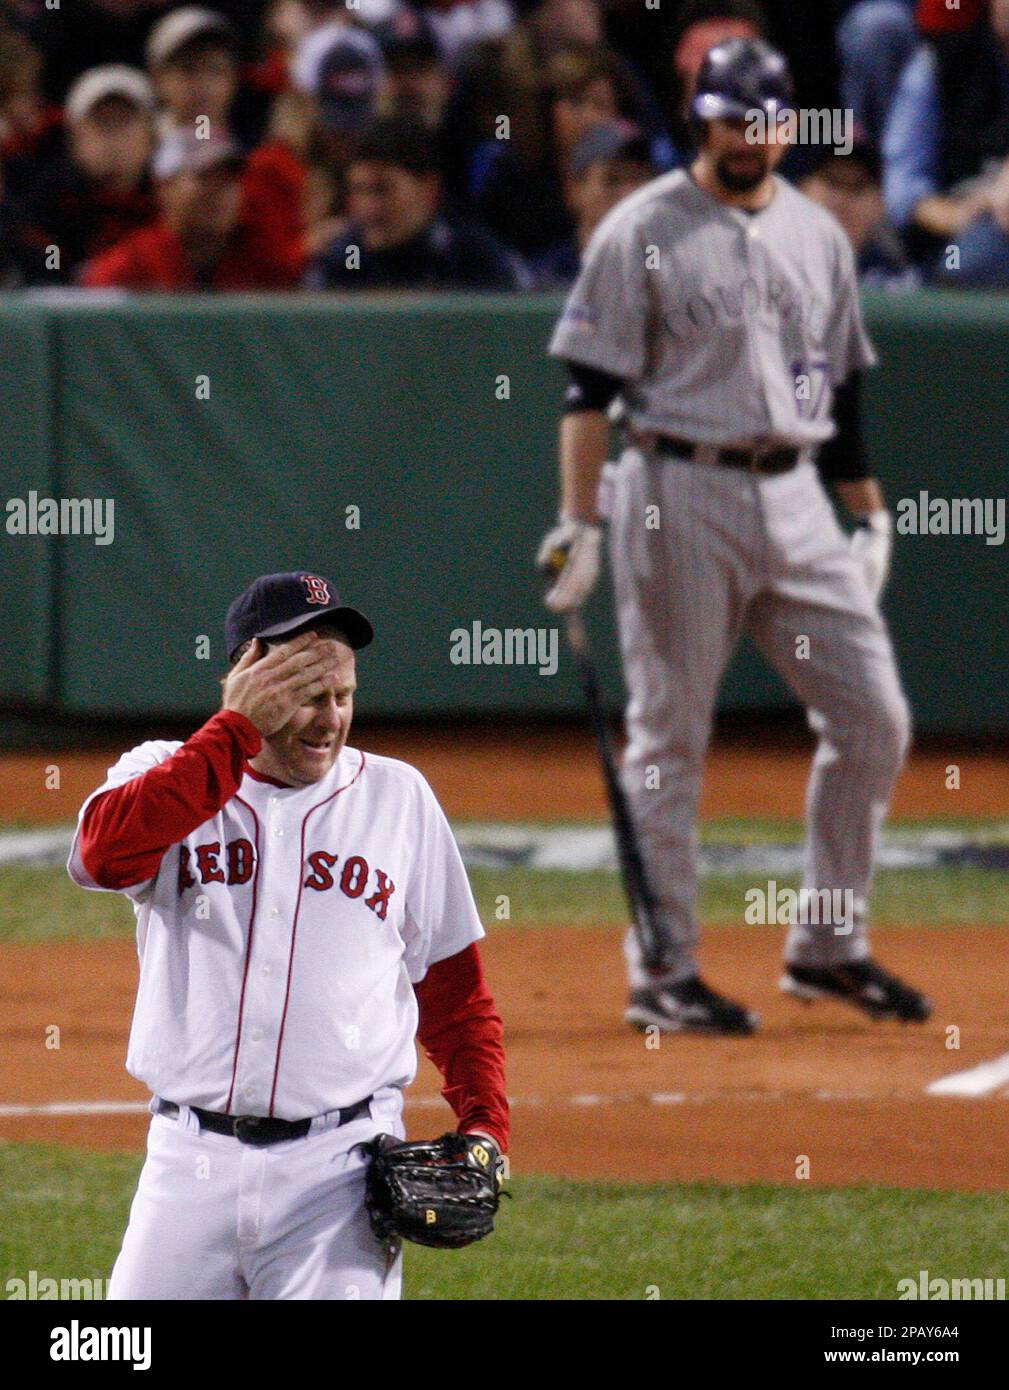 Boston Red Sox starter Curt Schilling wipes his head before pitching to  Colorado Rockies' Todd Helton during the first inning in Game 2 of the  baseball World Series Thursday, Oct. 25, 2007